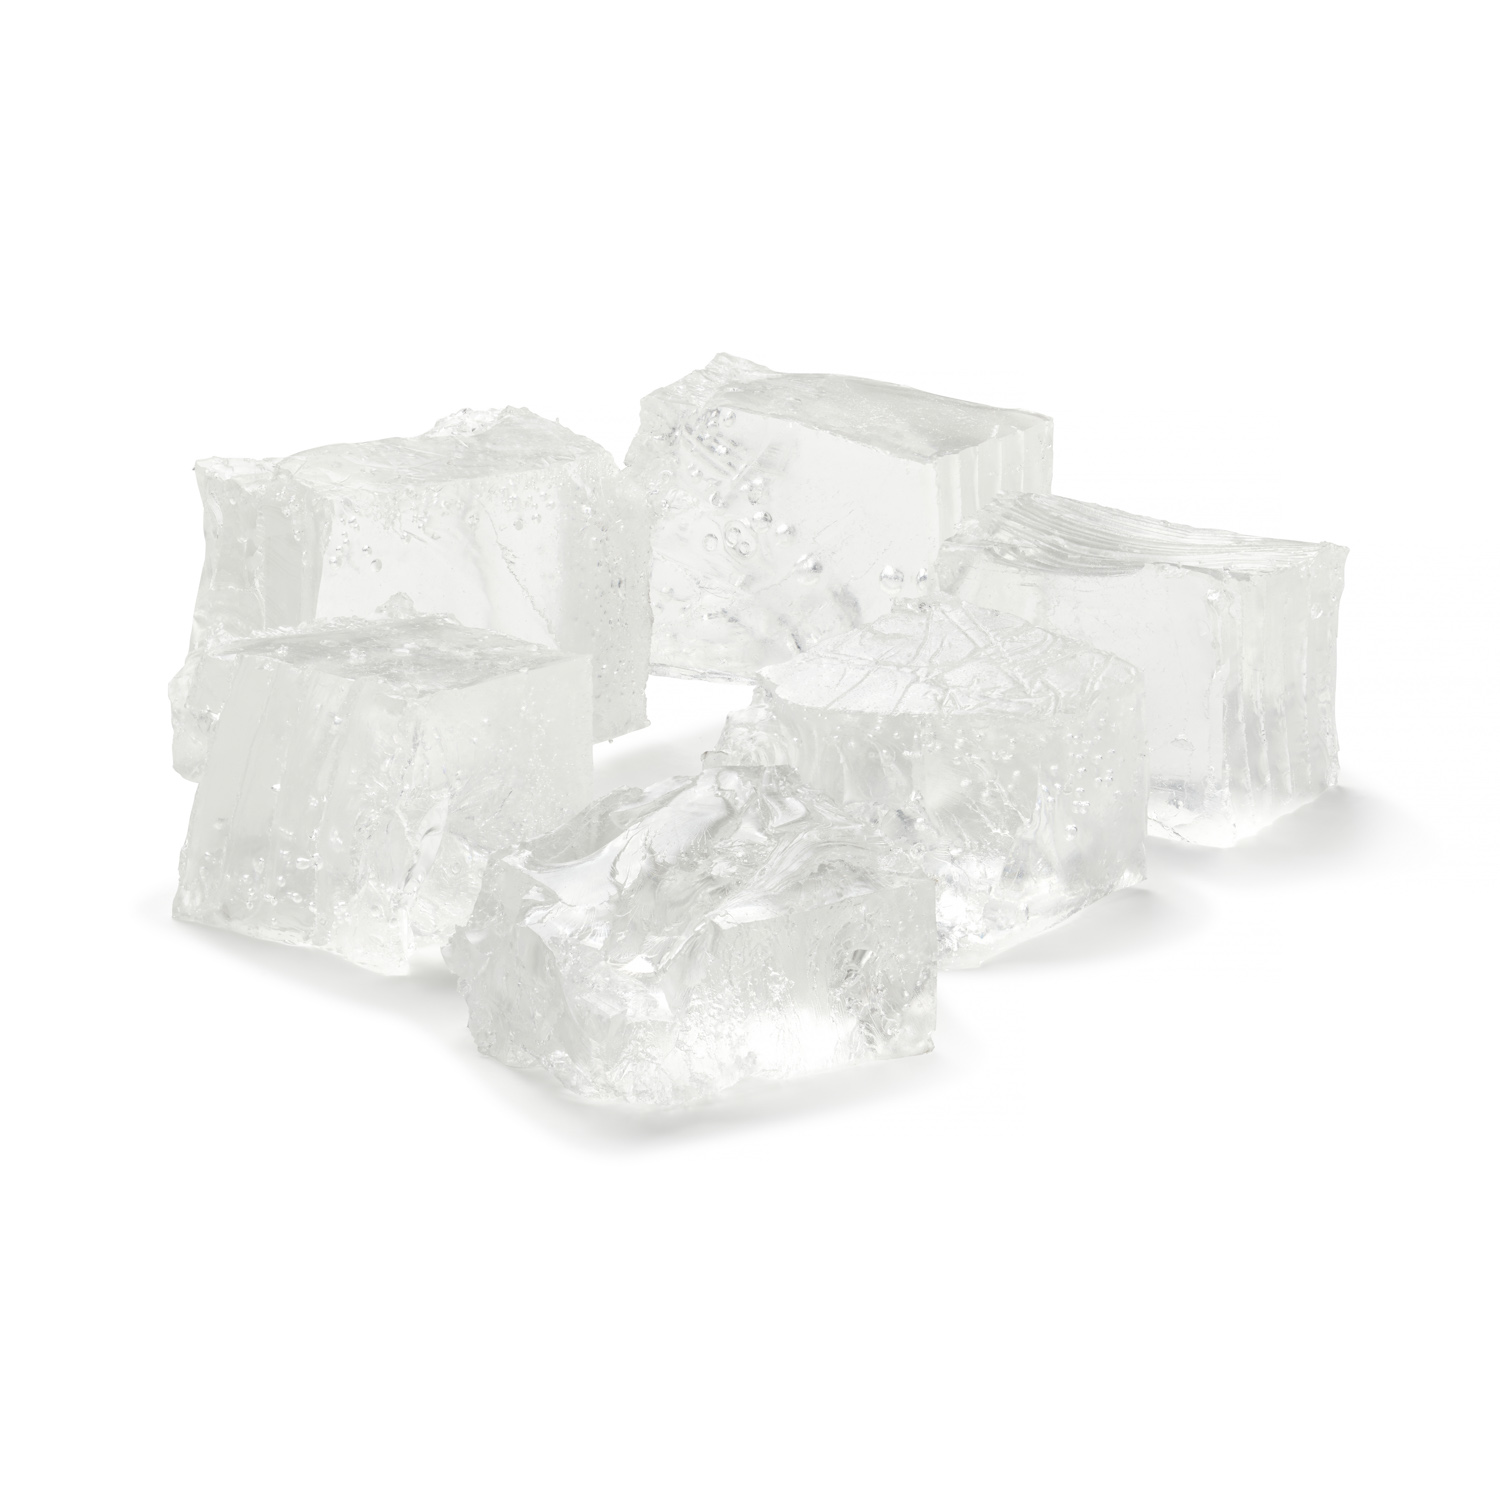 Cubes of Special Effects Gel Wax - Ice Wax